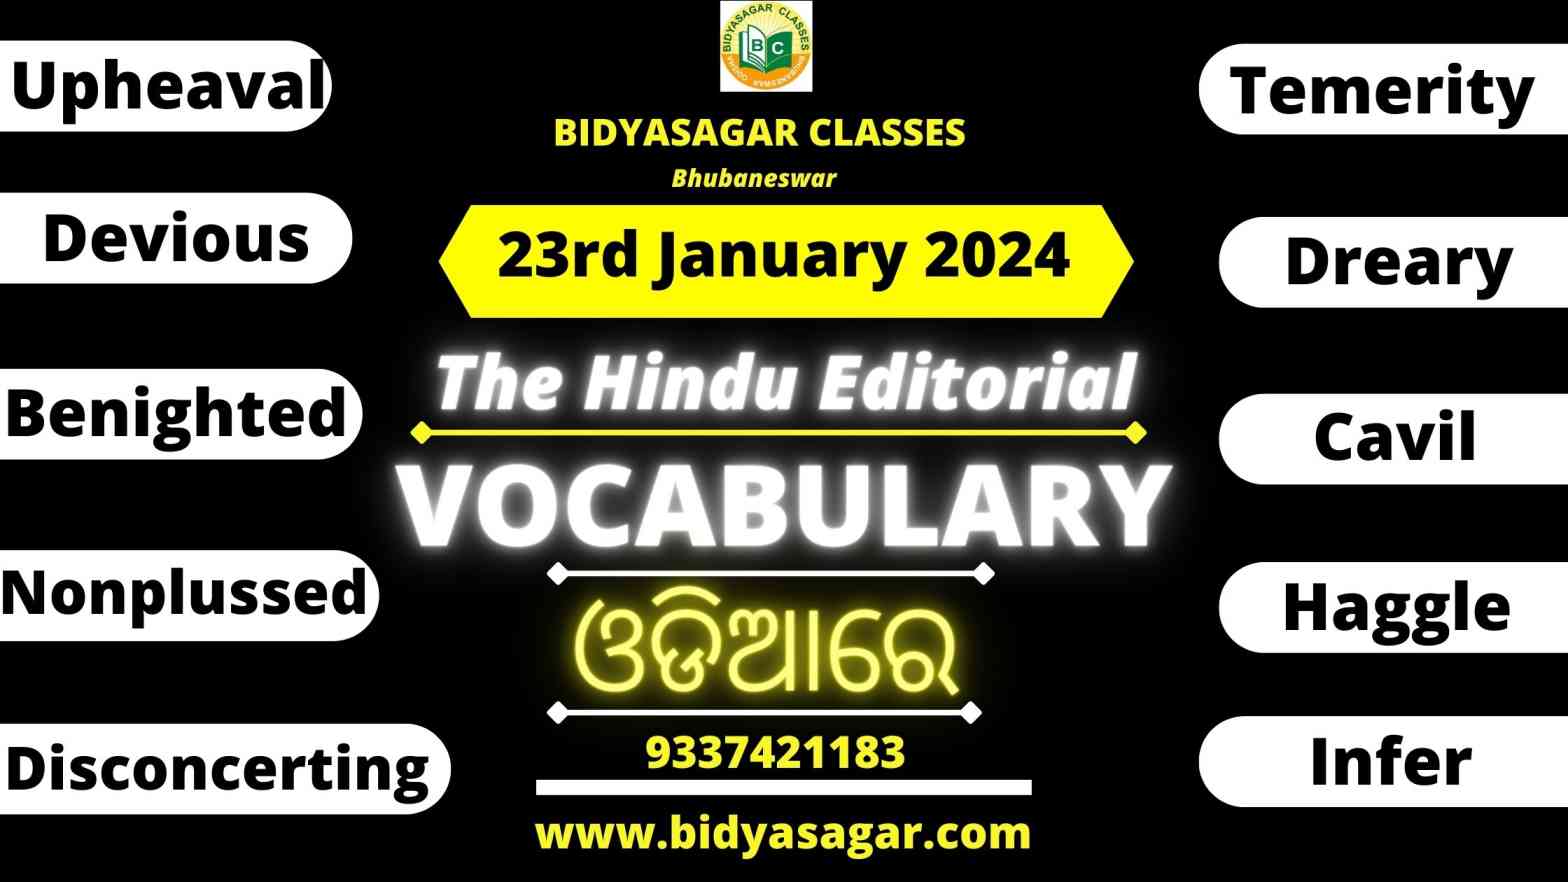 The Hindu Editorial Vocabulary of 23rd January 2024